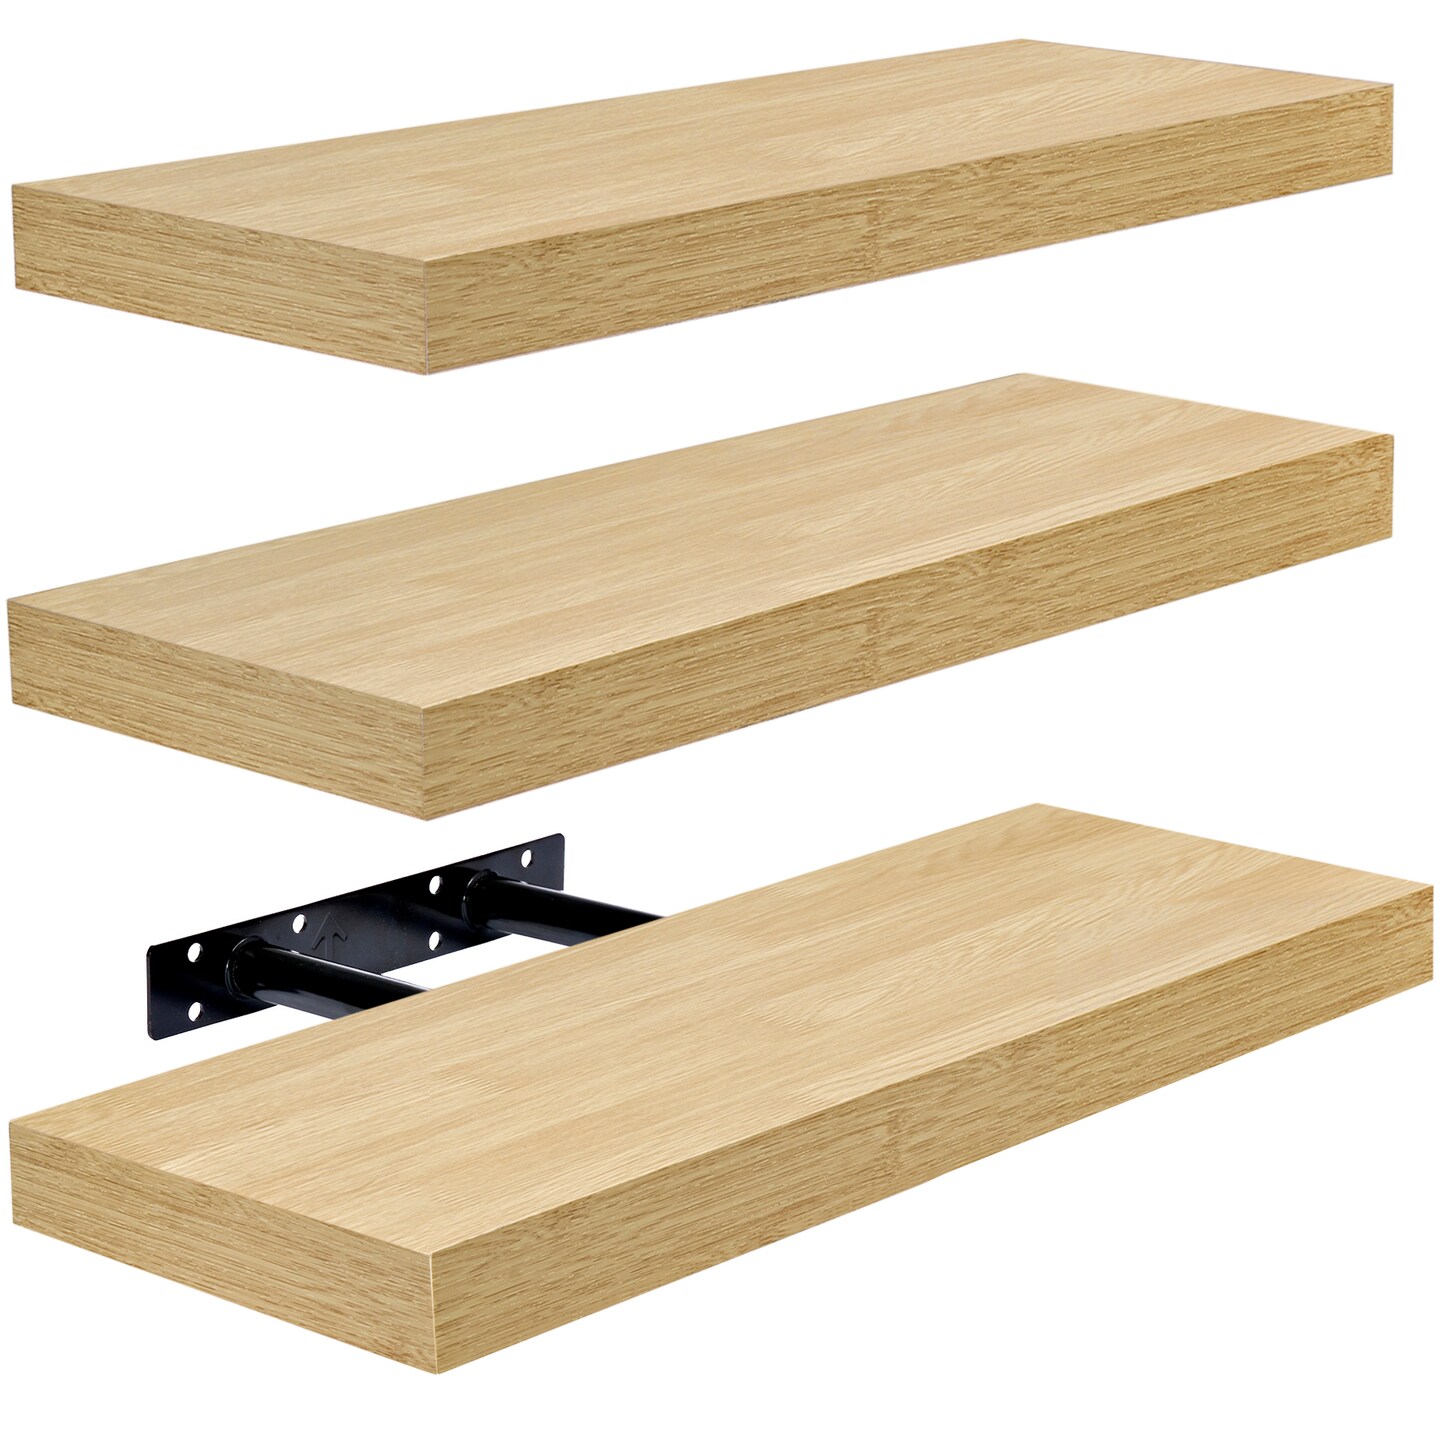 3 Pack 16 Inch Sorbus Coastal Rectangle Floating Shelves - for Home Decor to Display Trophies, Books, Frames, and more